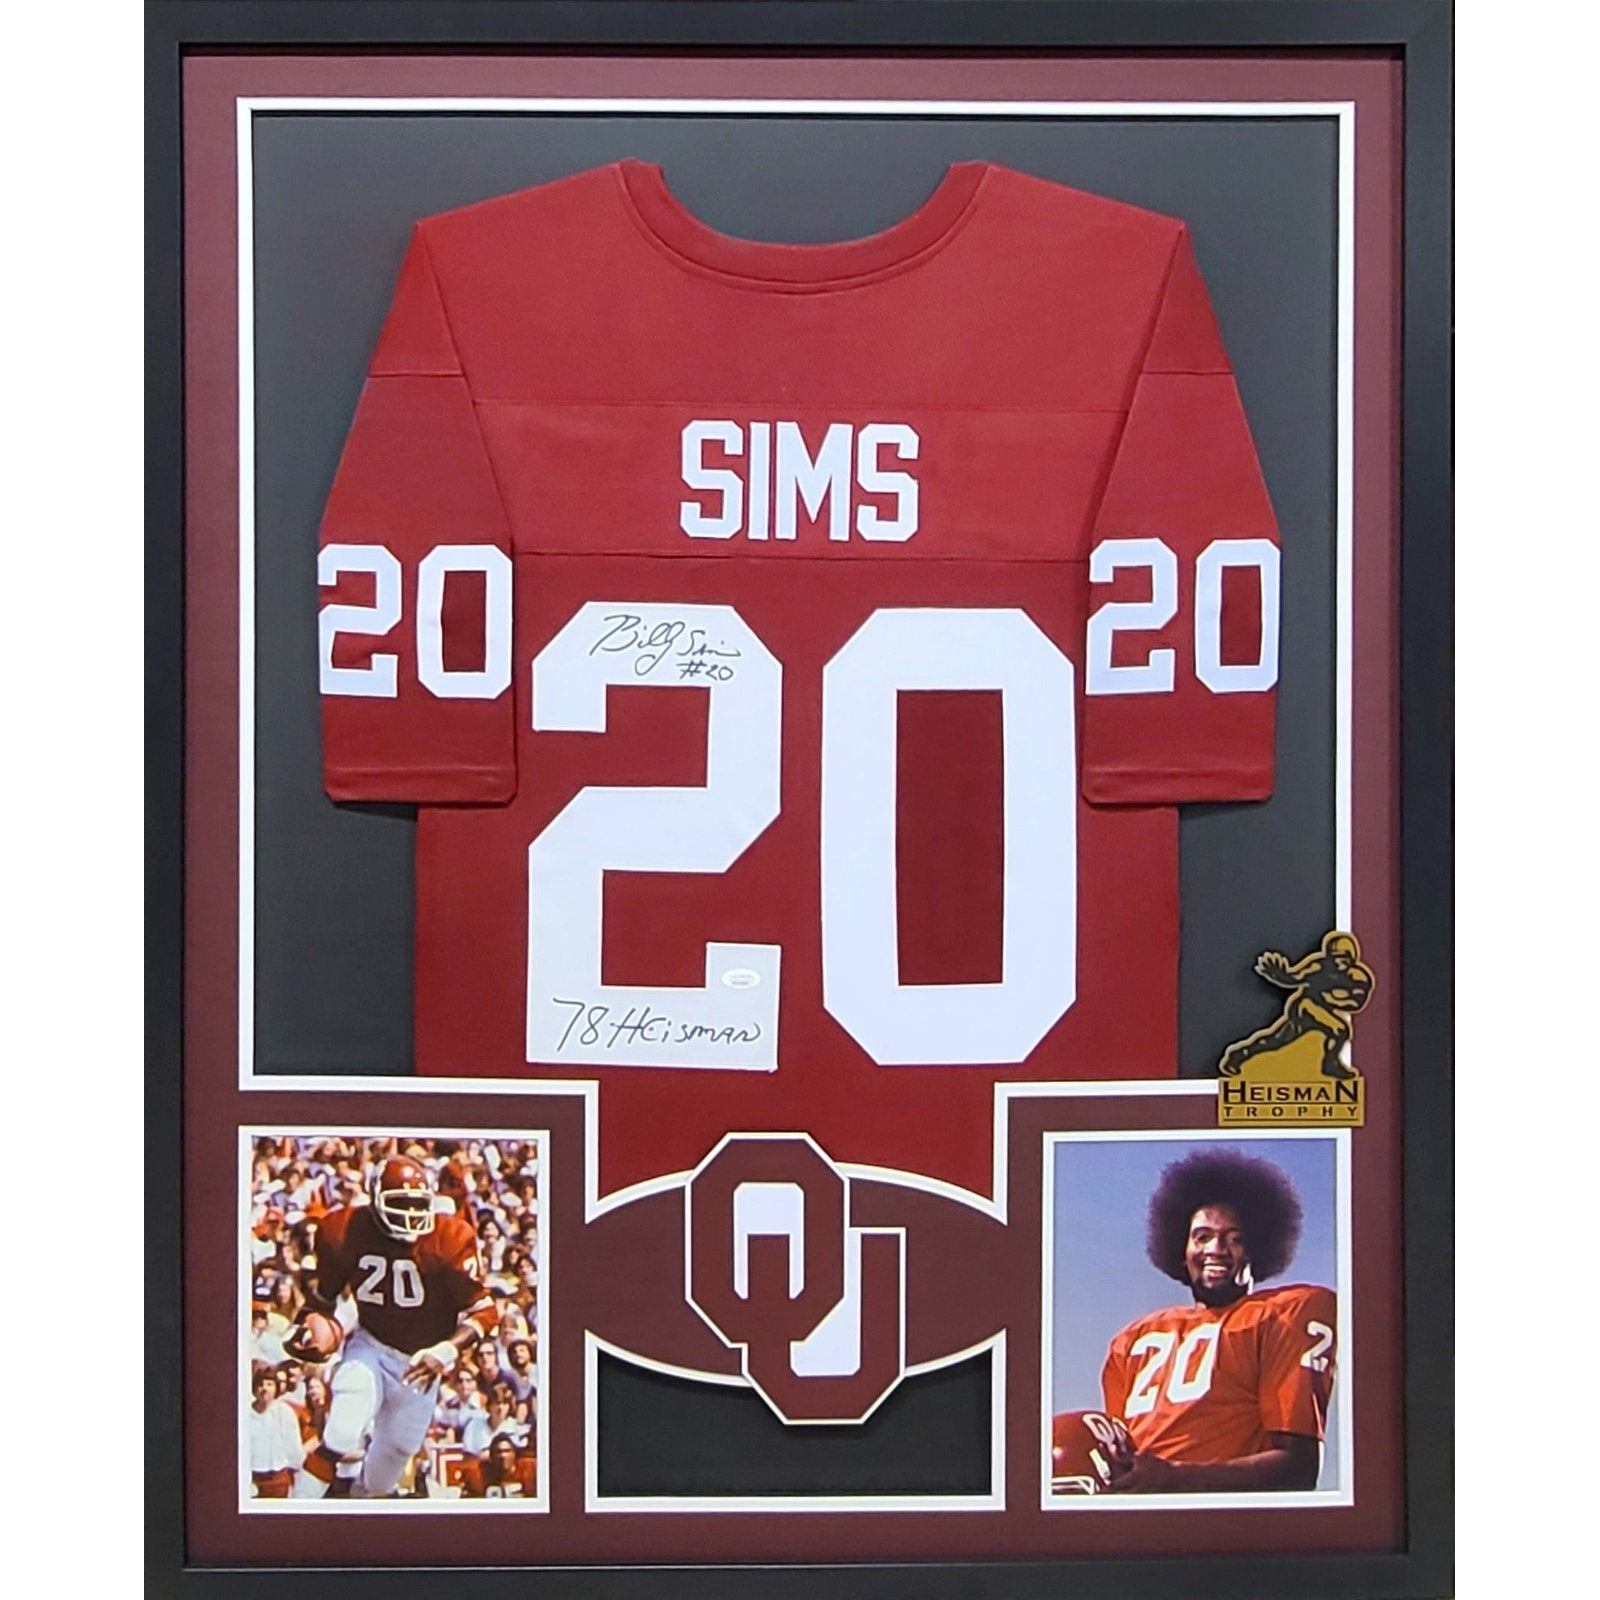 Billy Sims Signed Framed Jersey JSA Autographed Oklahoma Sooners Heisman